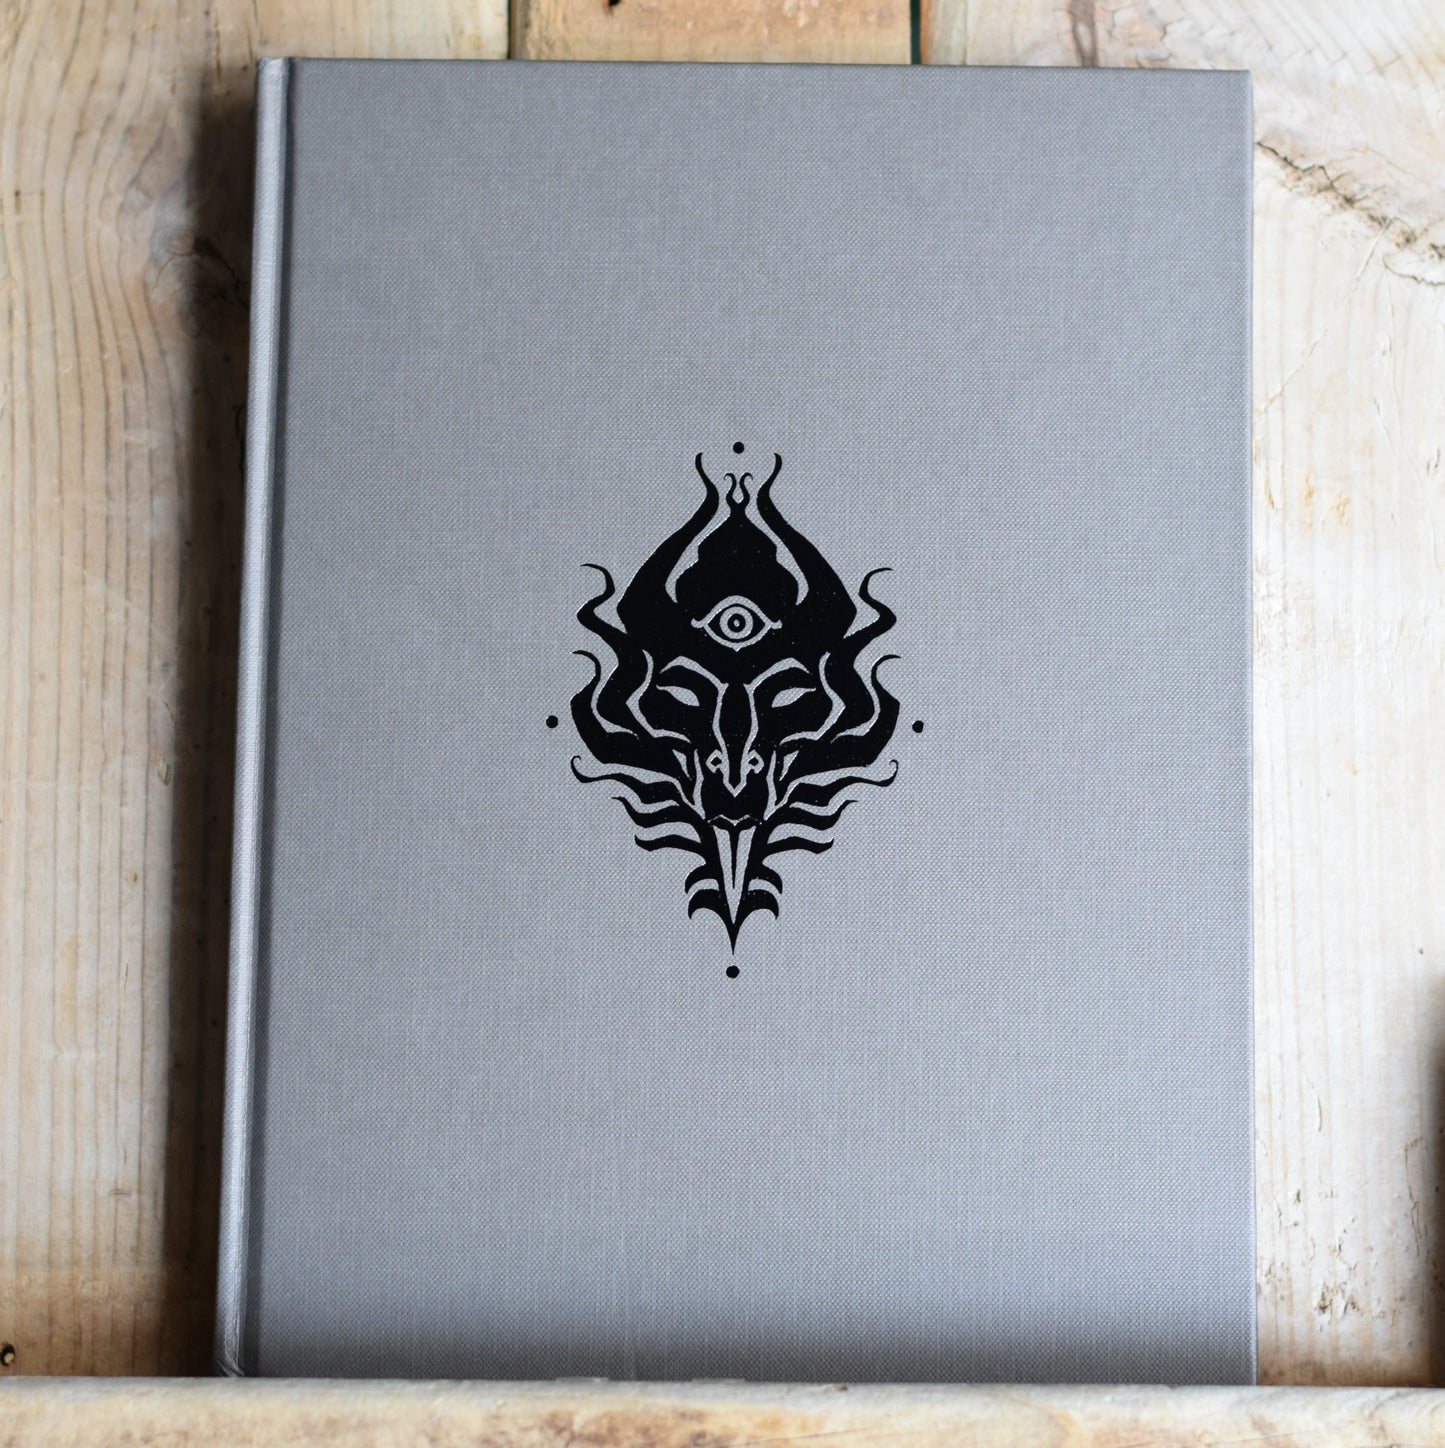 Fantasy Art Hardback: Gerald Brom - The Art of Brom (Publishers Edition) SIGNED FIRST EDITION